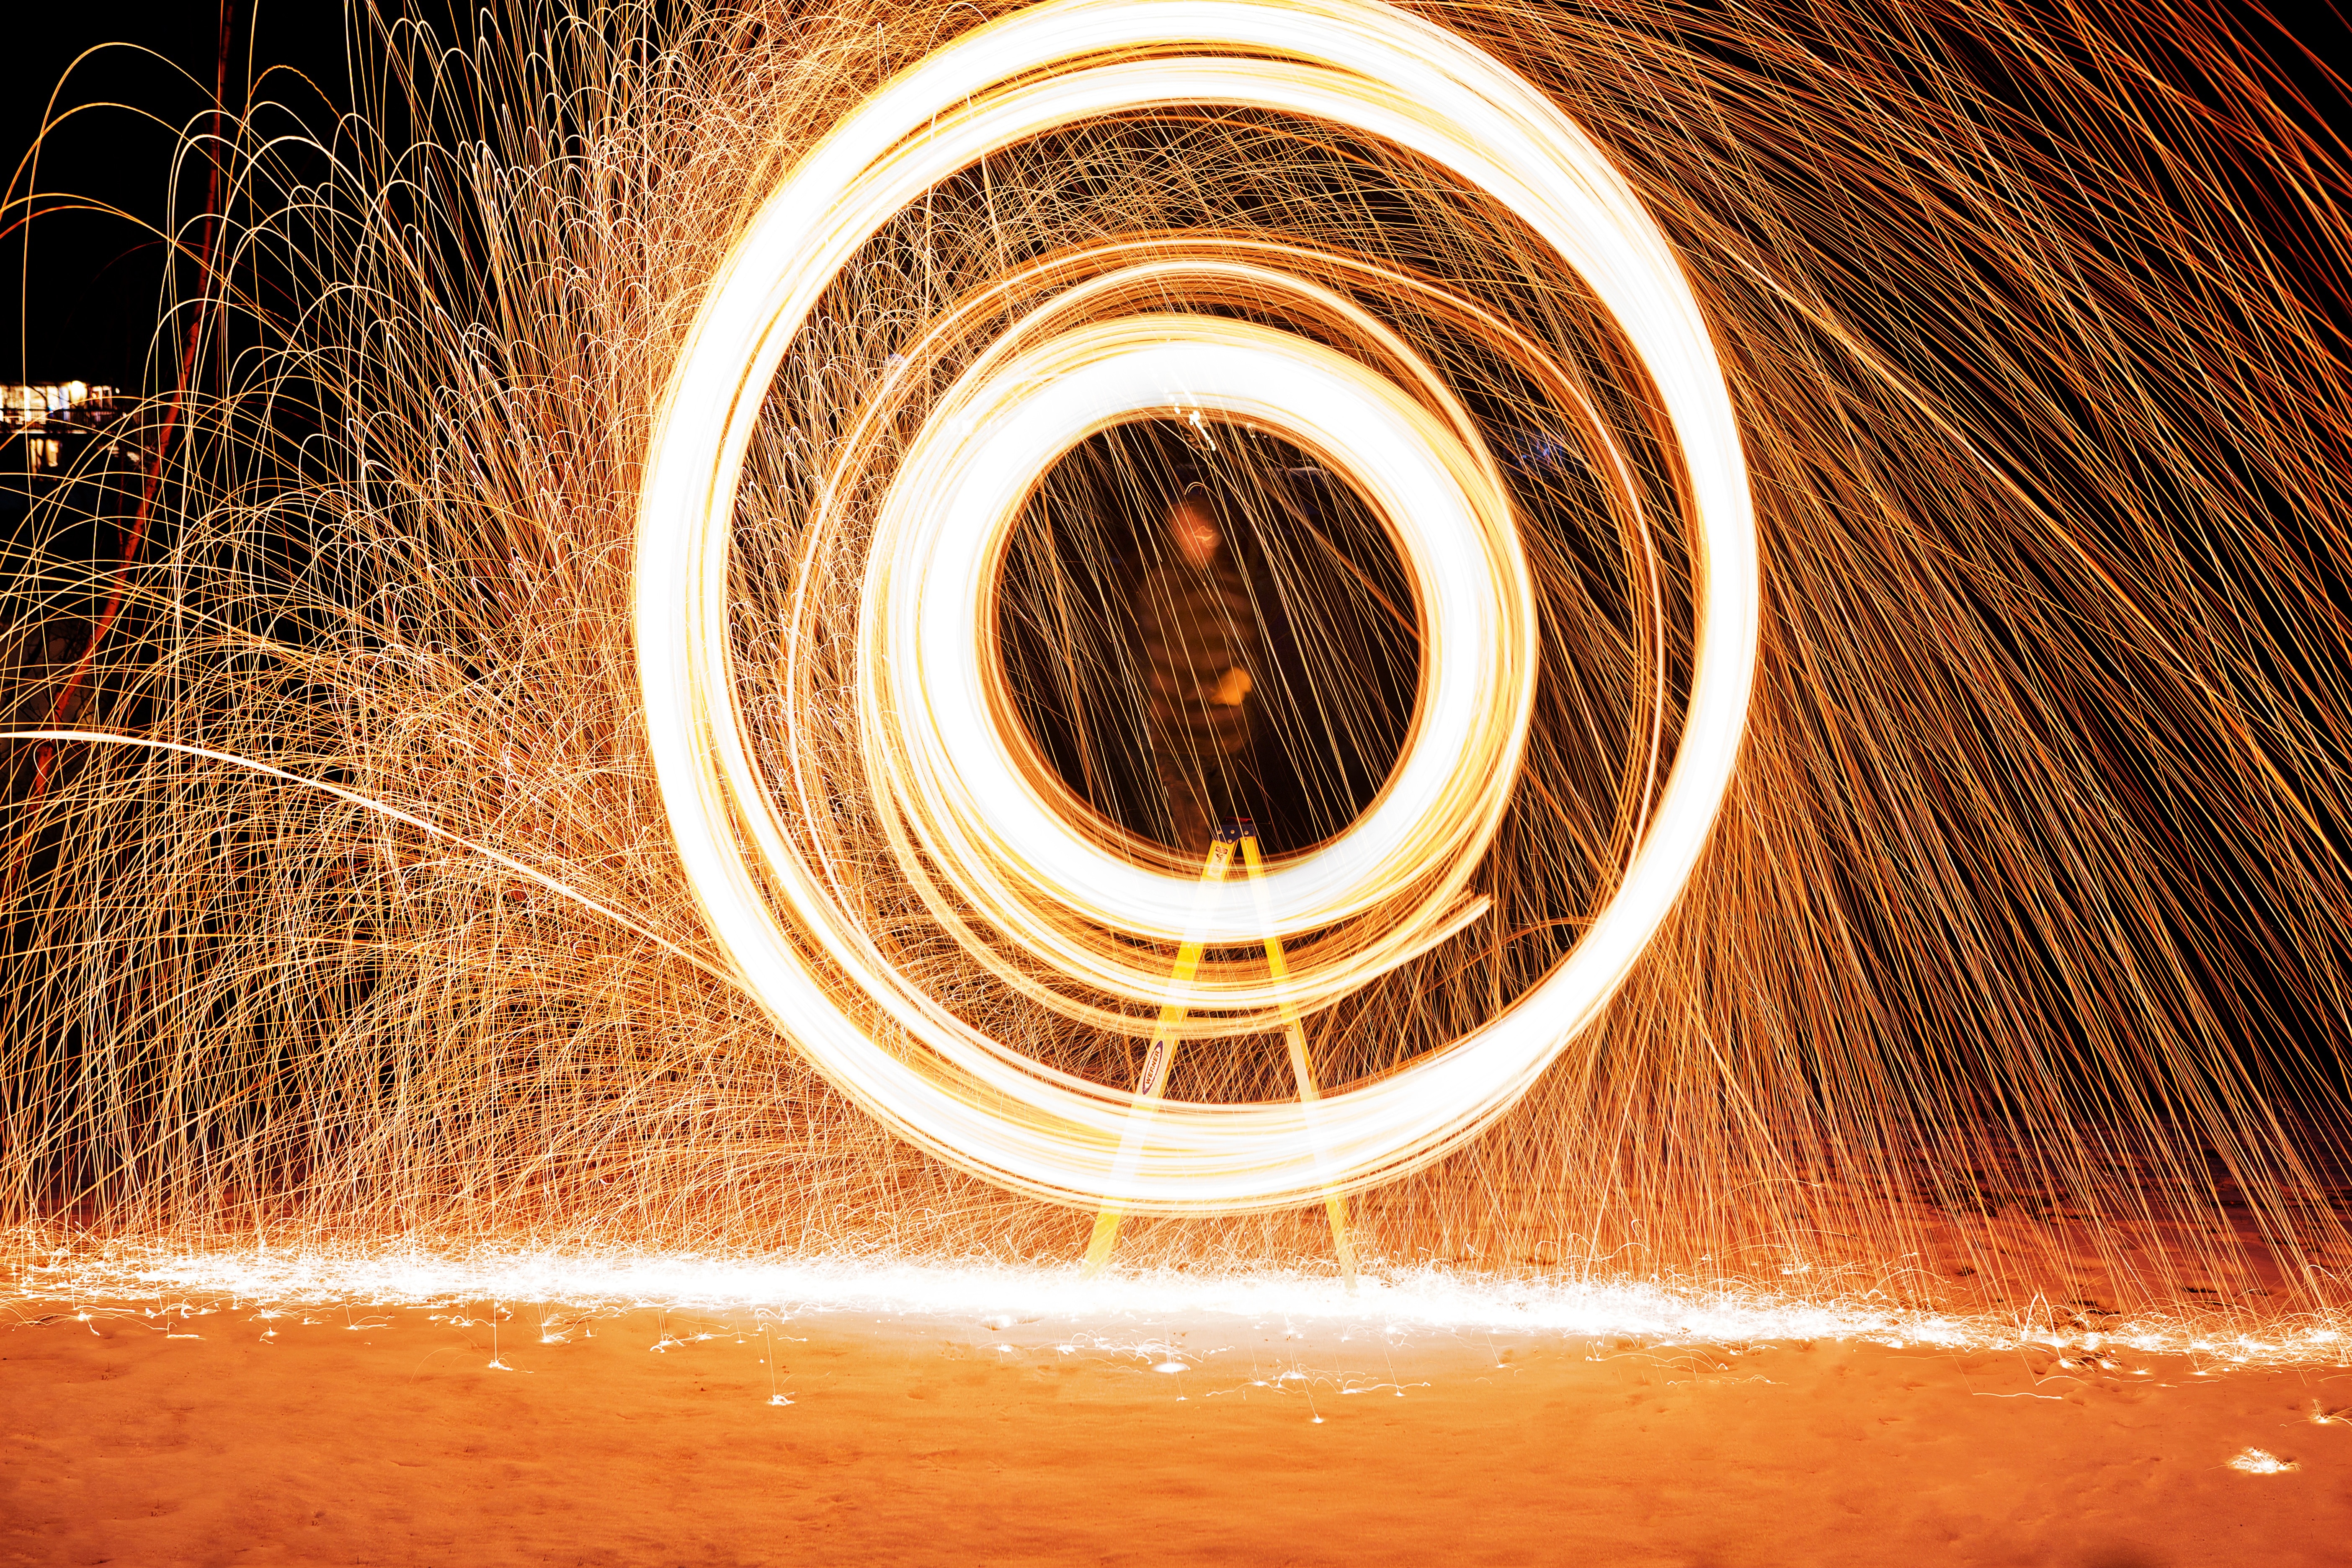 timelaps photography of burning steel wool